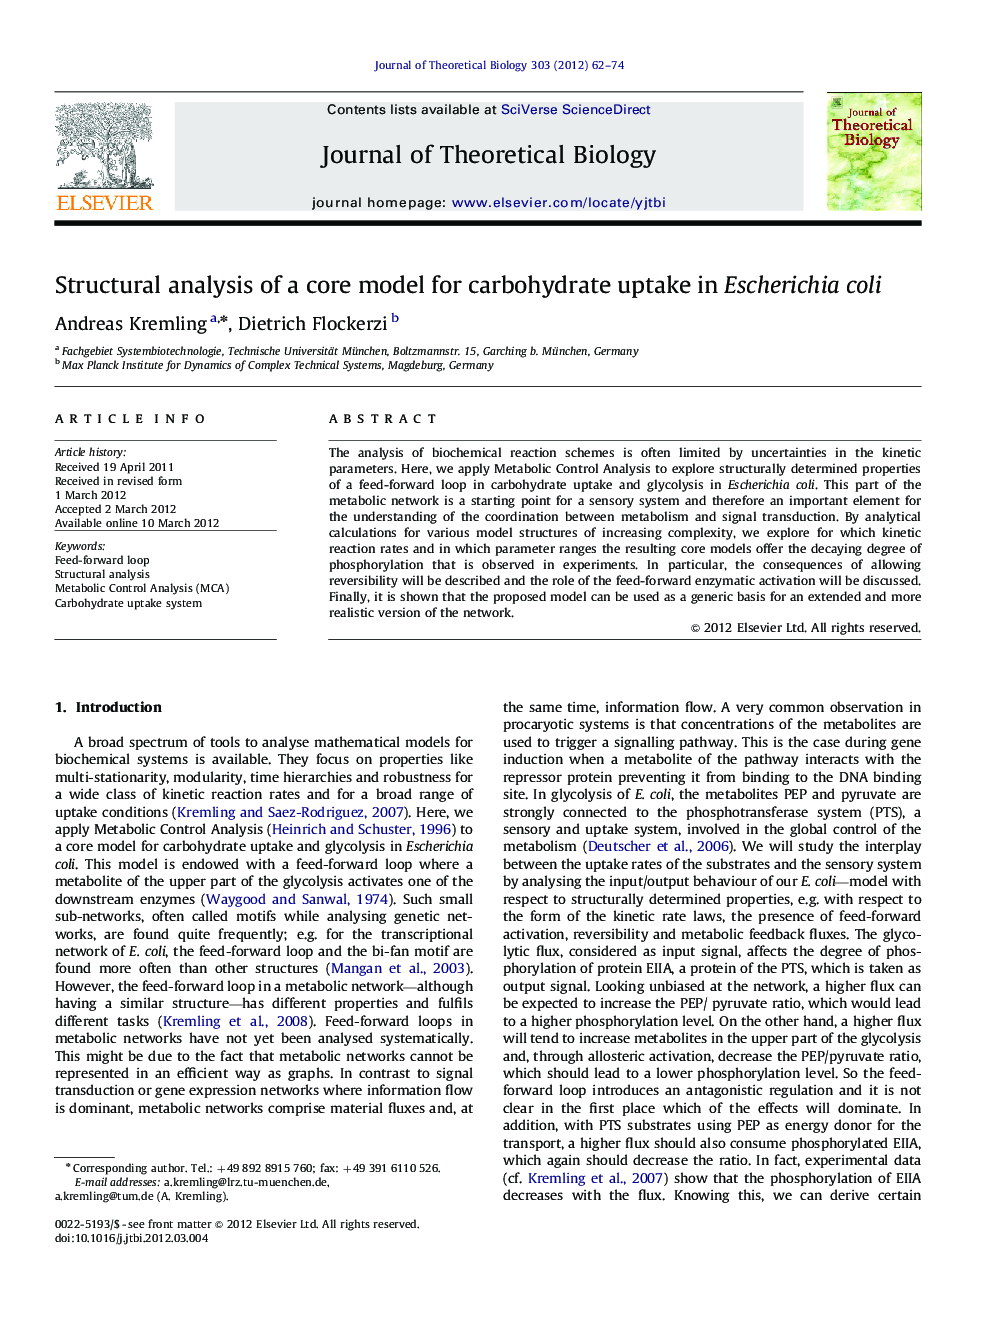 Structural analysis of a core model for carbohydrate uptake in Escherichia coli